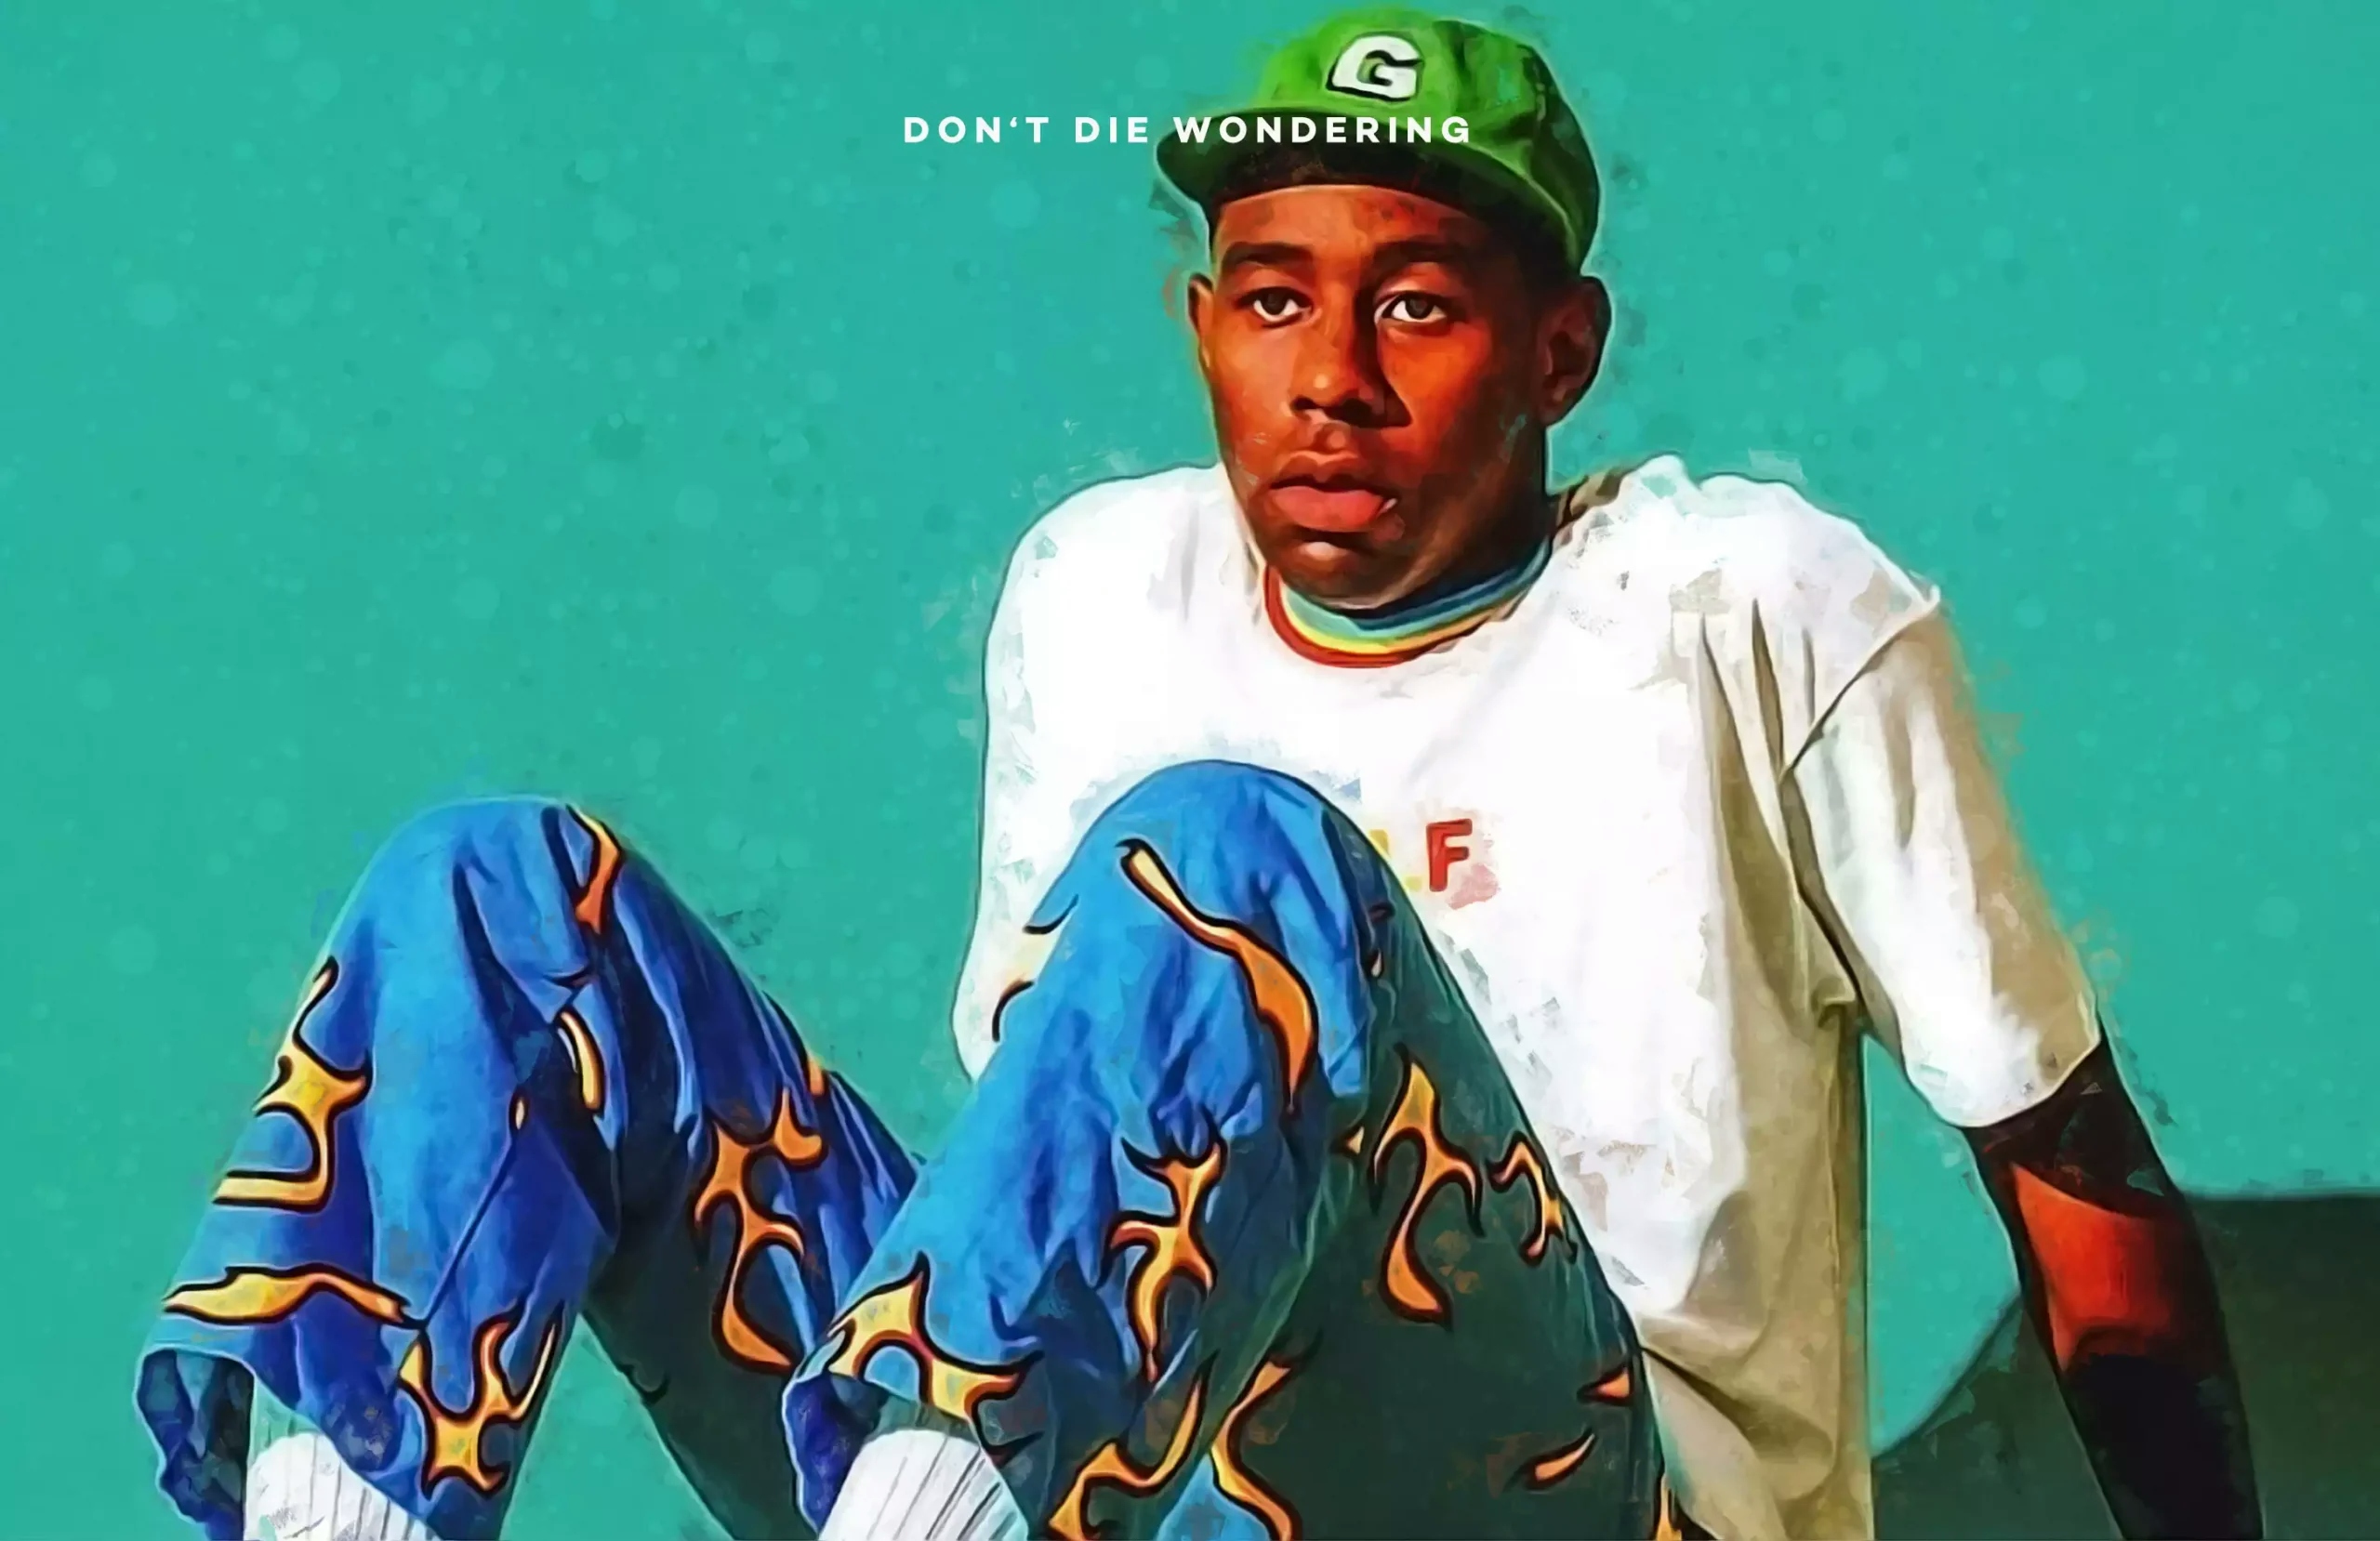 Tyler, The Creator: “I Always Did What I Want. I Always Knew I’d Be Successful.”